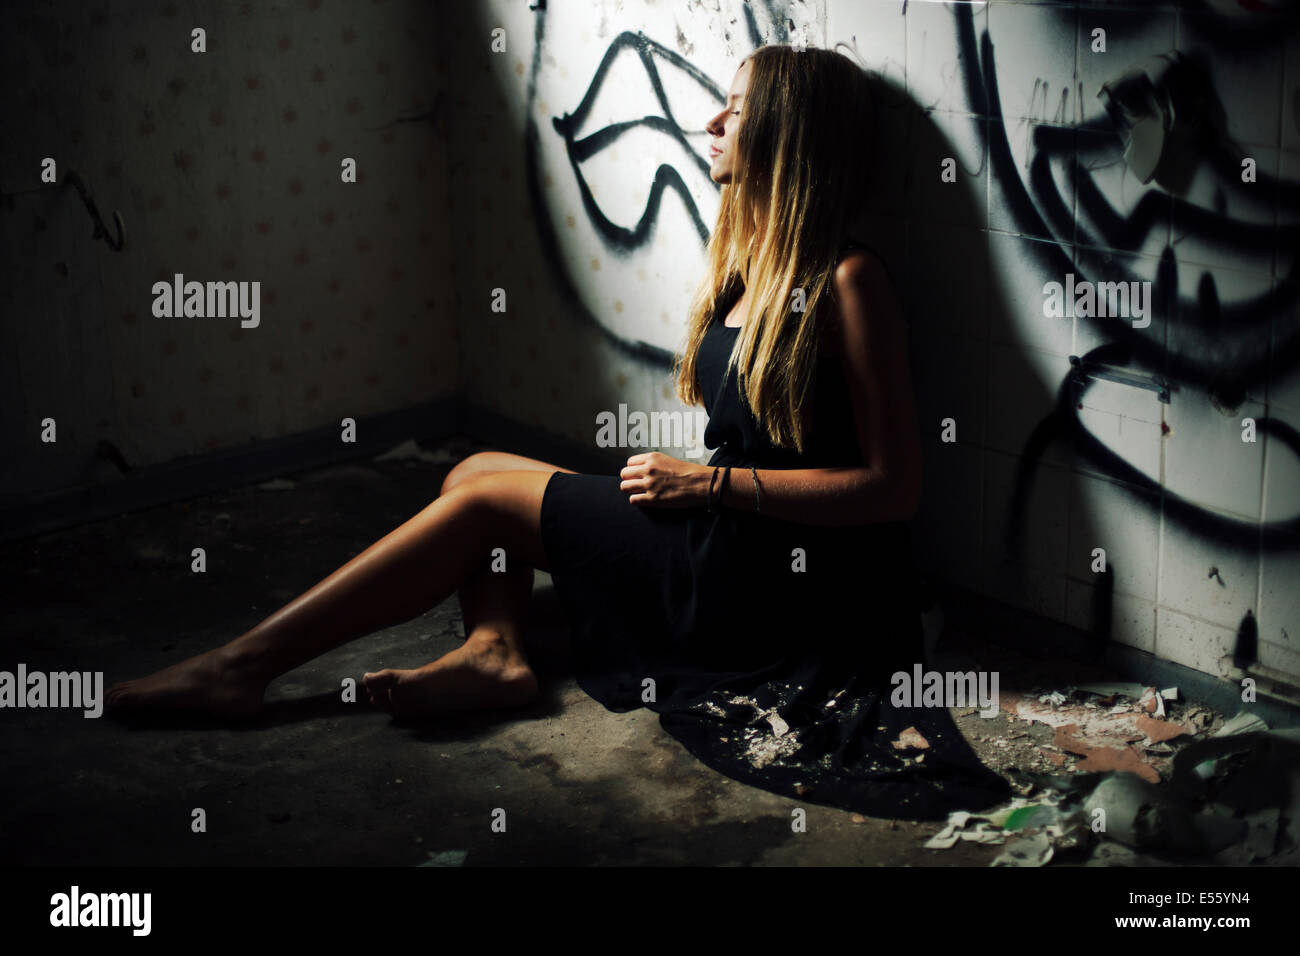 Young woman sitting on dirty floor Stock Photo